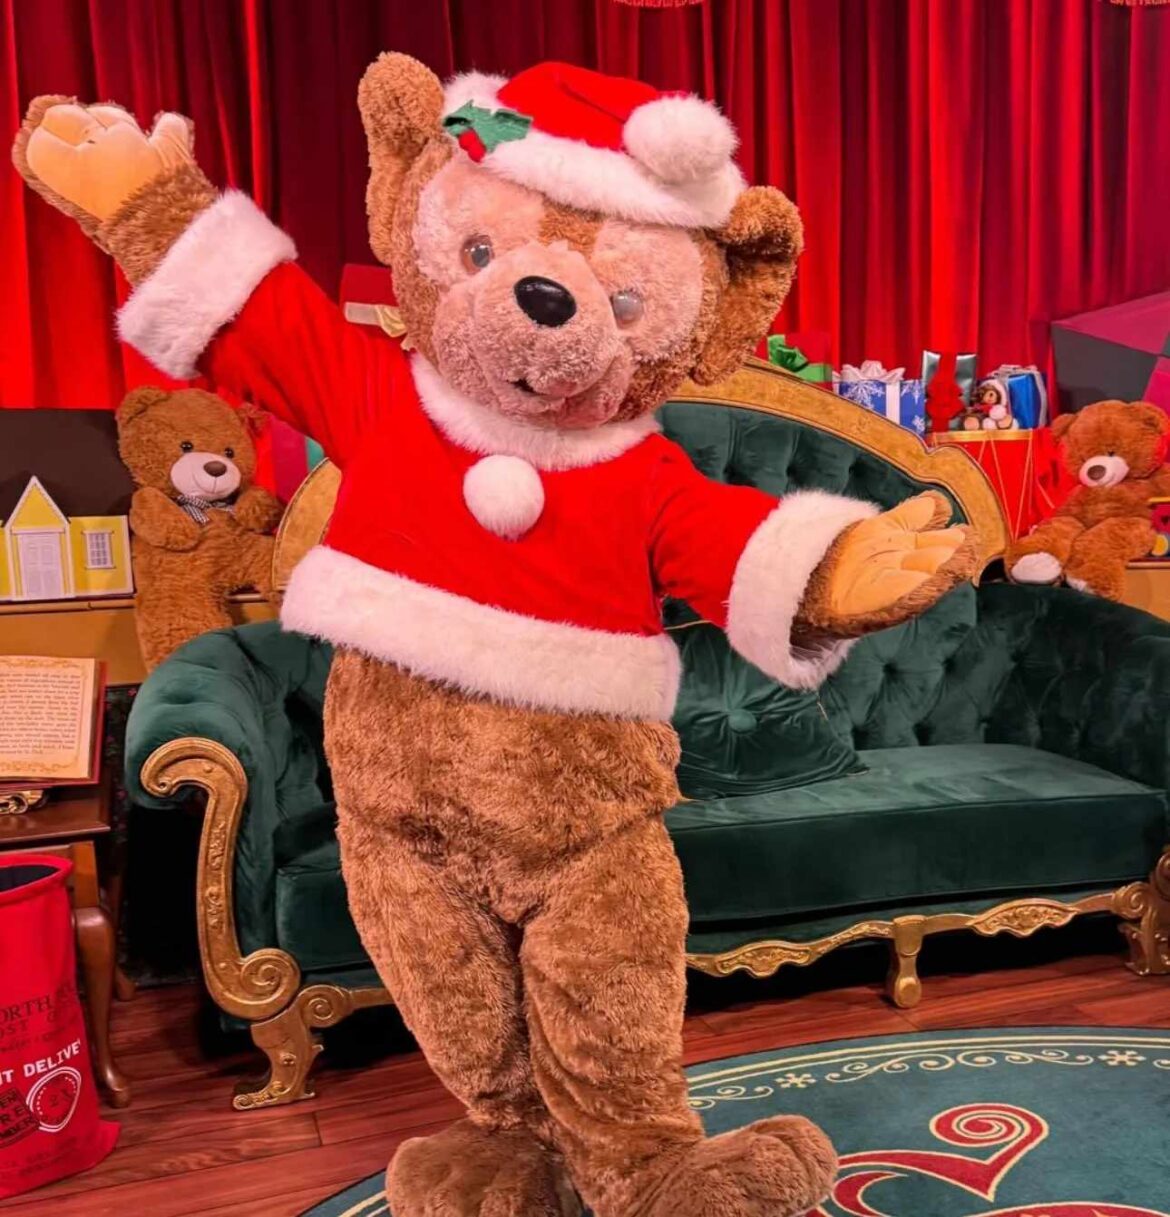 Duffy the Disney Bear Greeting Guests in Hollywood Studios